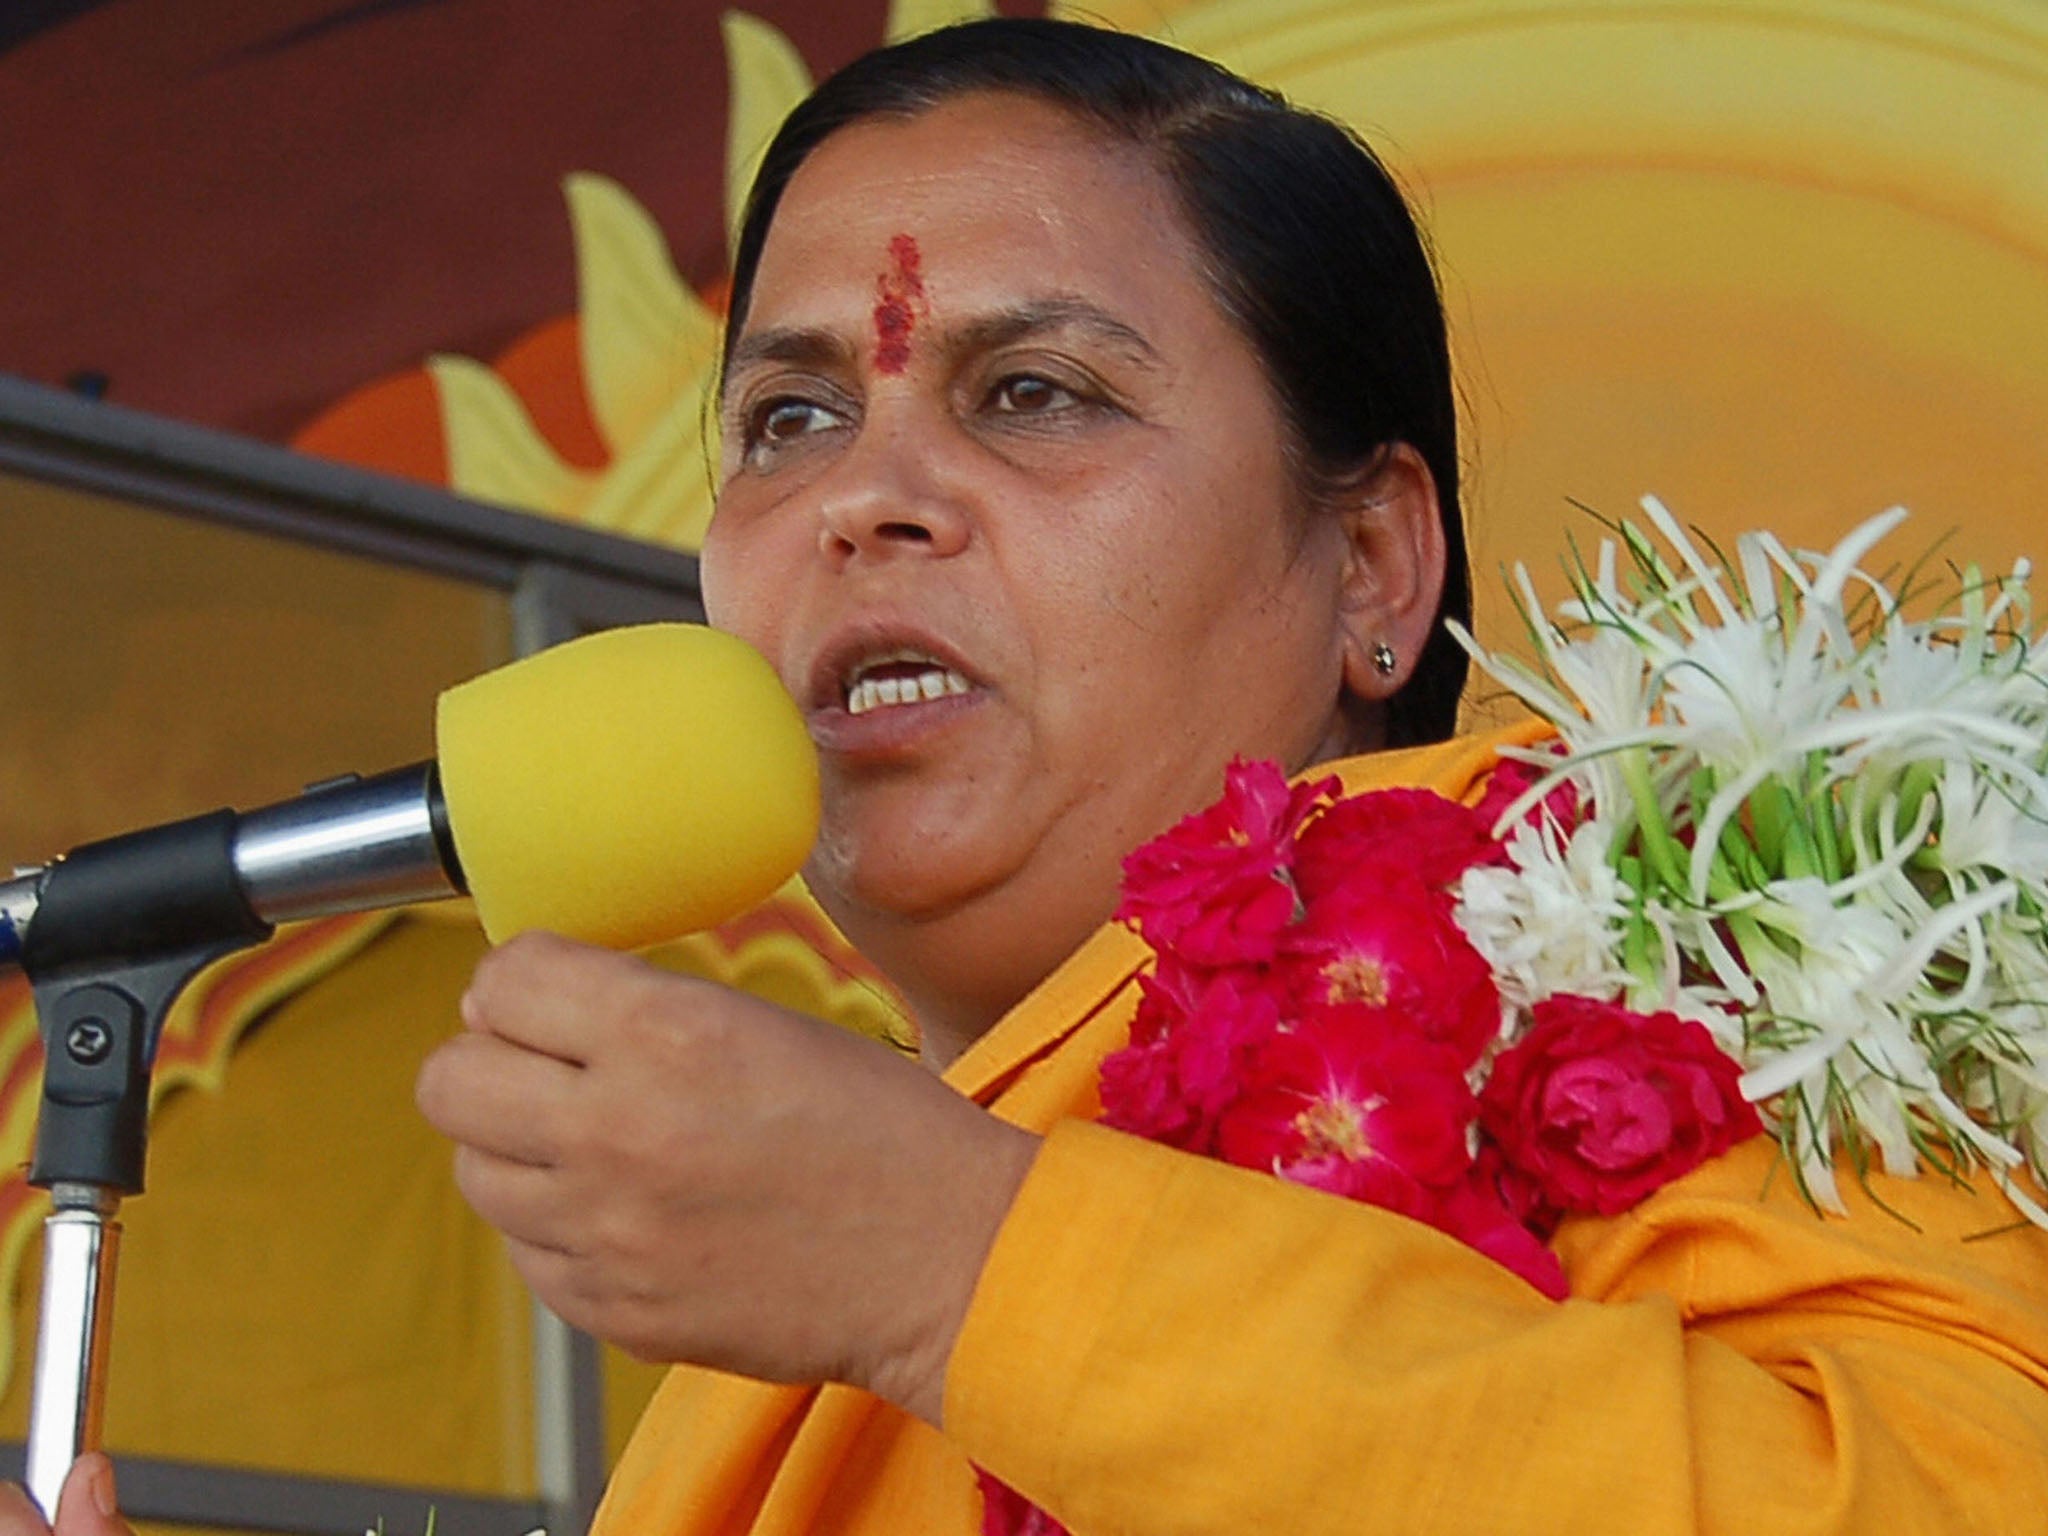 Uma Bharti is the water resources minister and member of the ruling Bharatiya Janata Party (BJP) in India